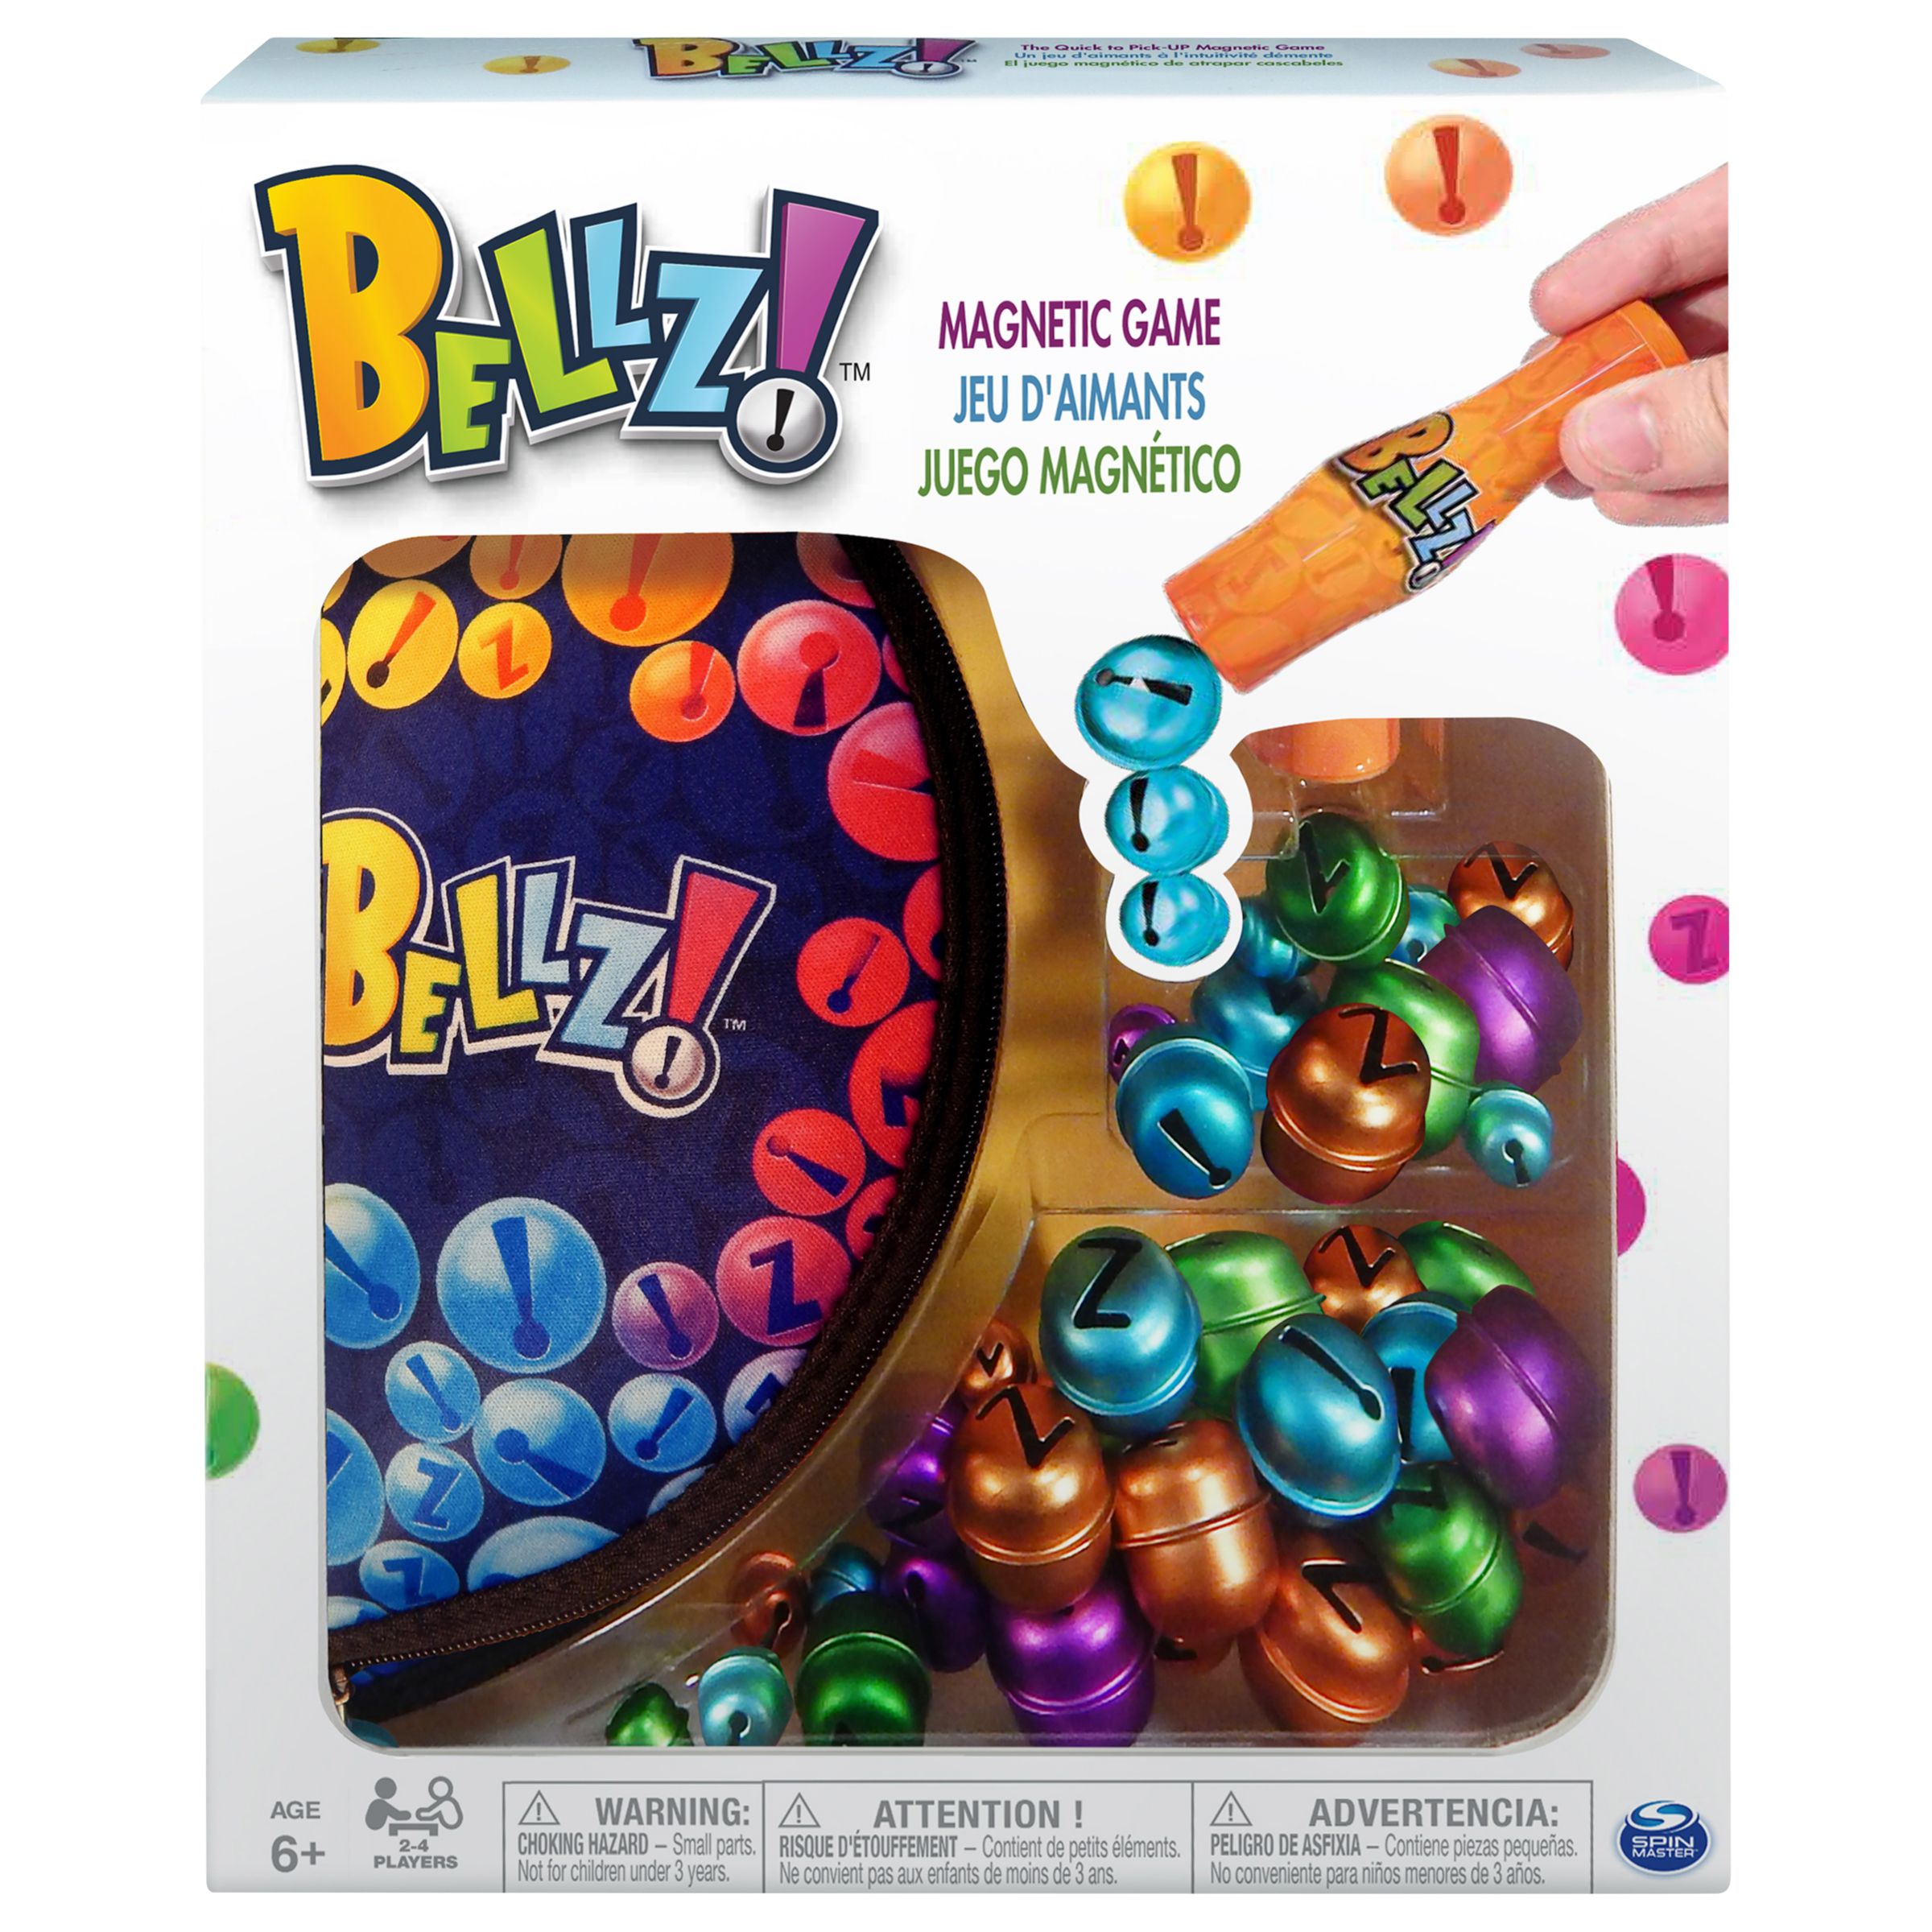 Bellz Game Review - In The Playroom